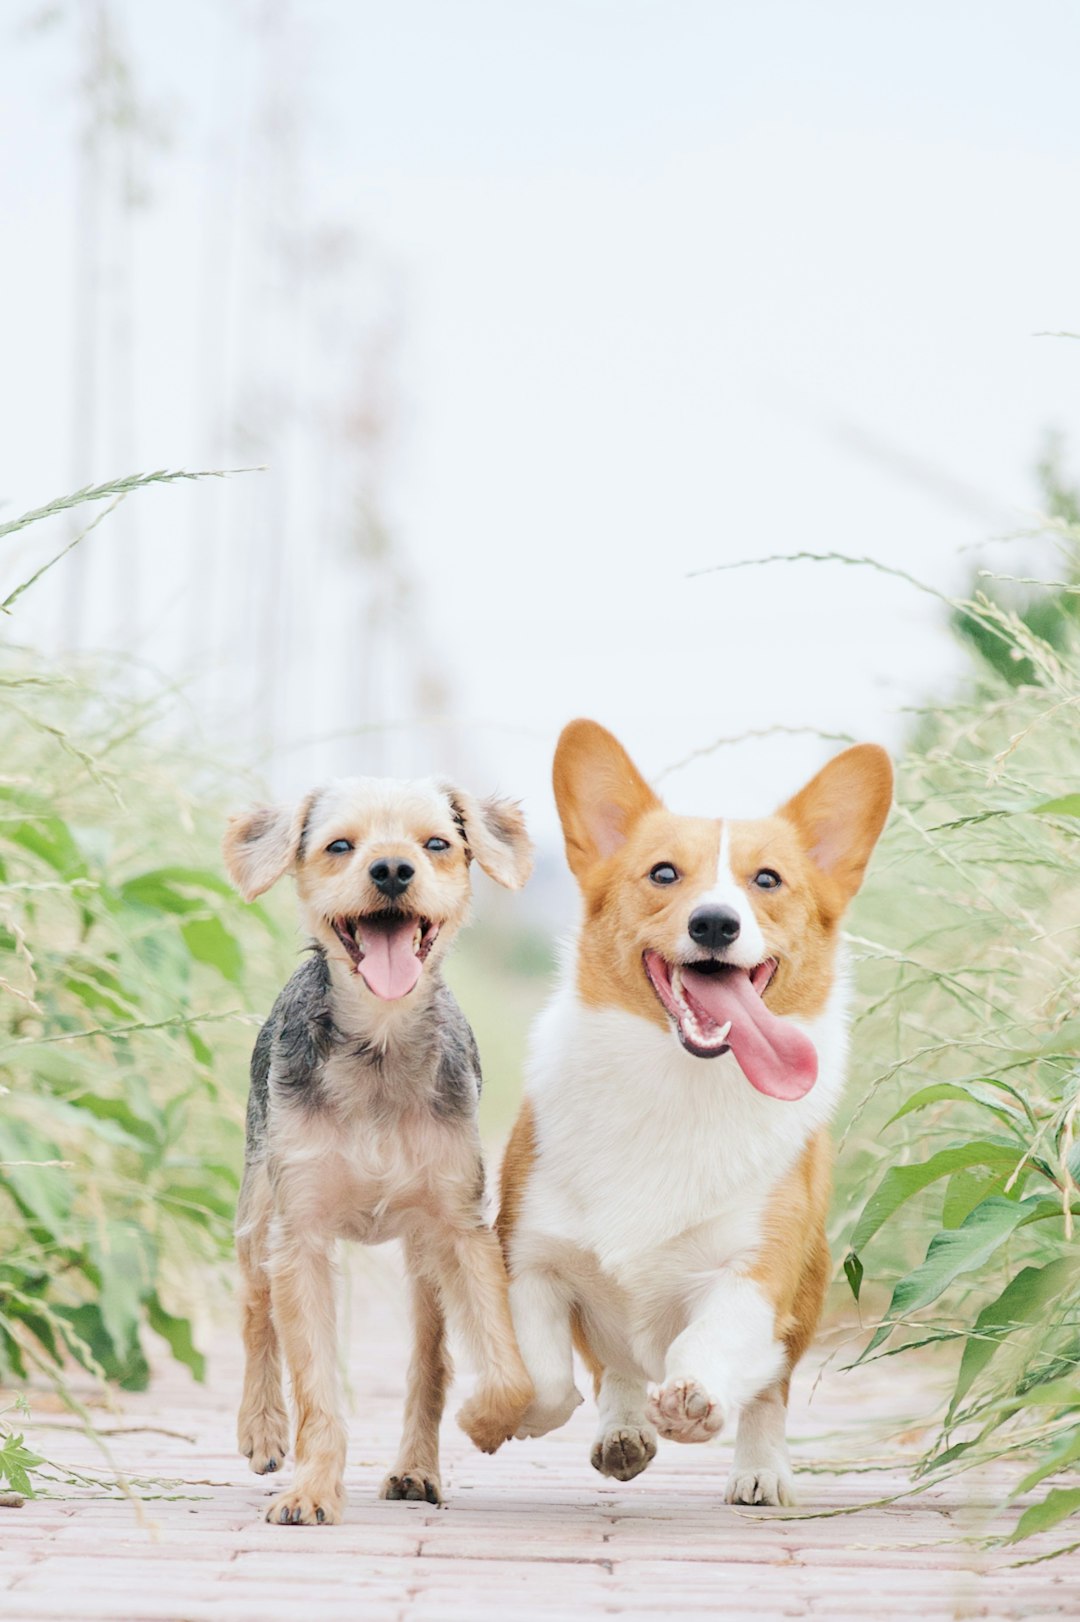 Two dogs running towards the camera